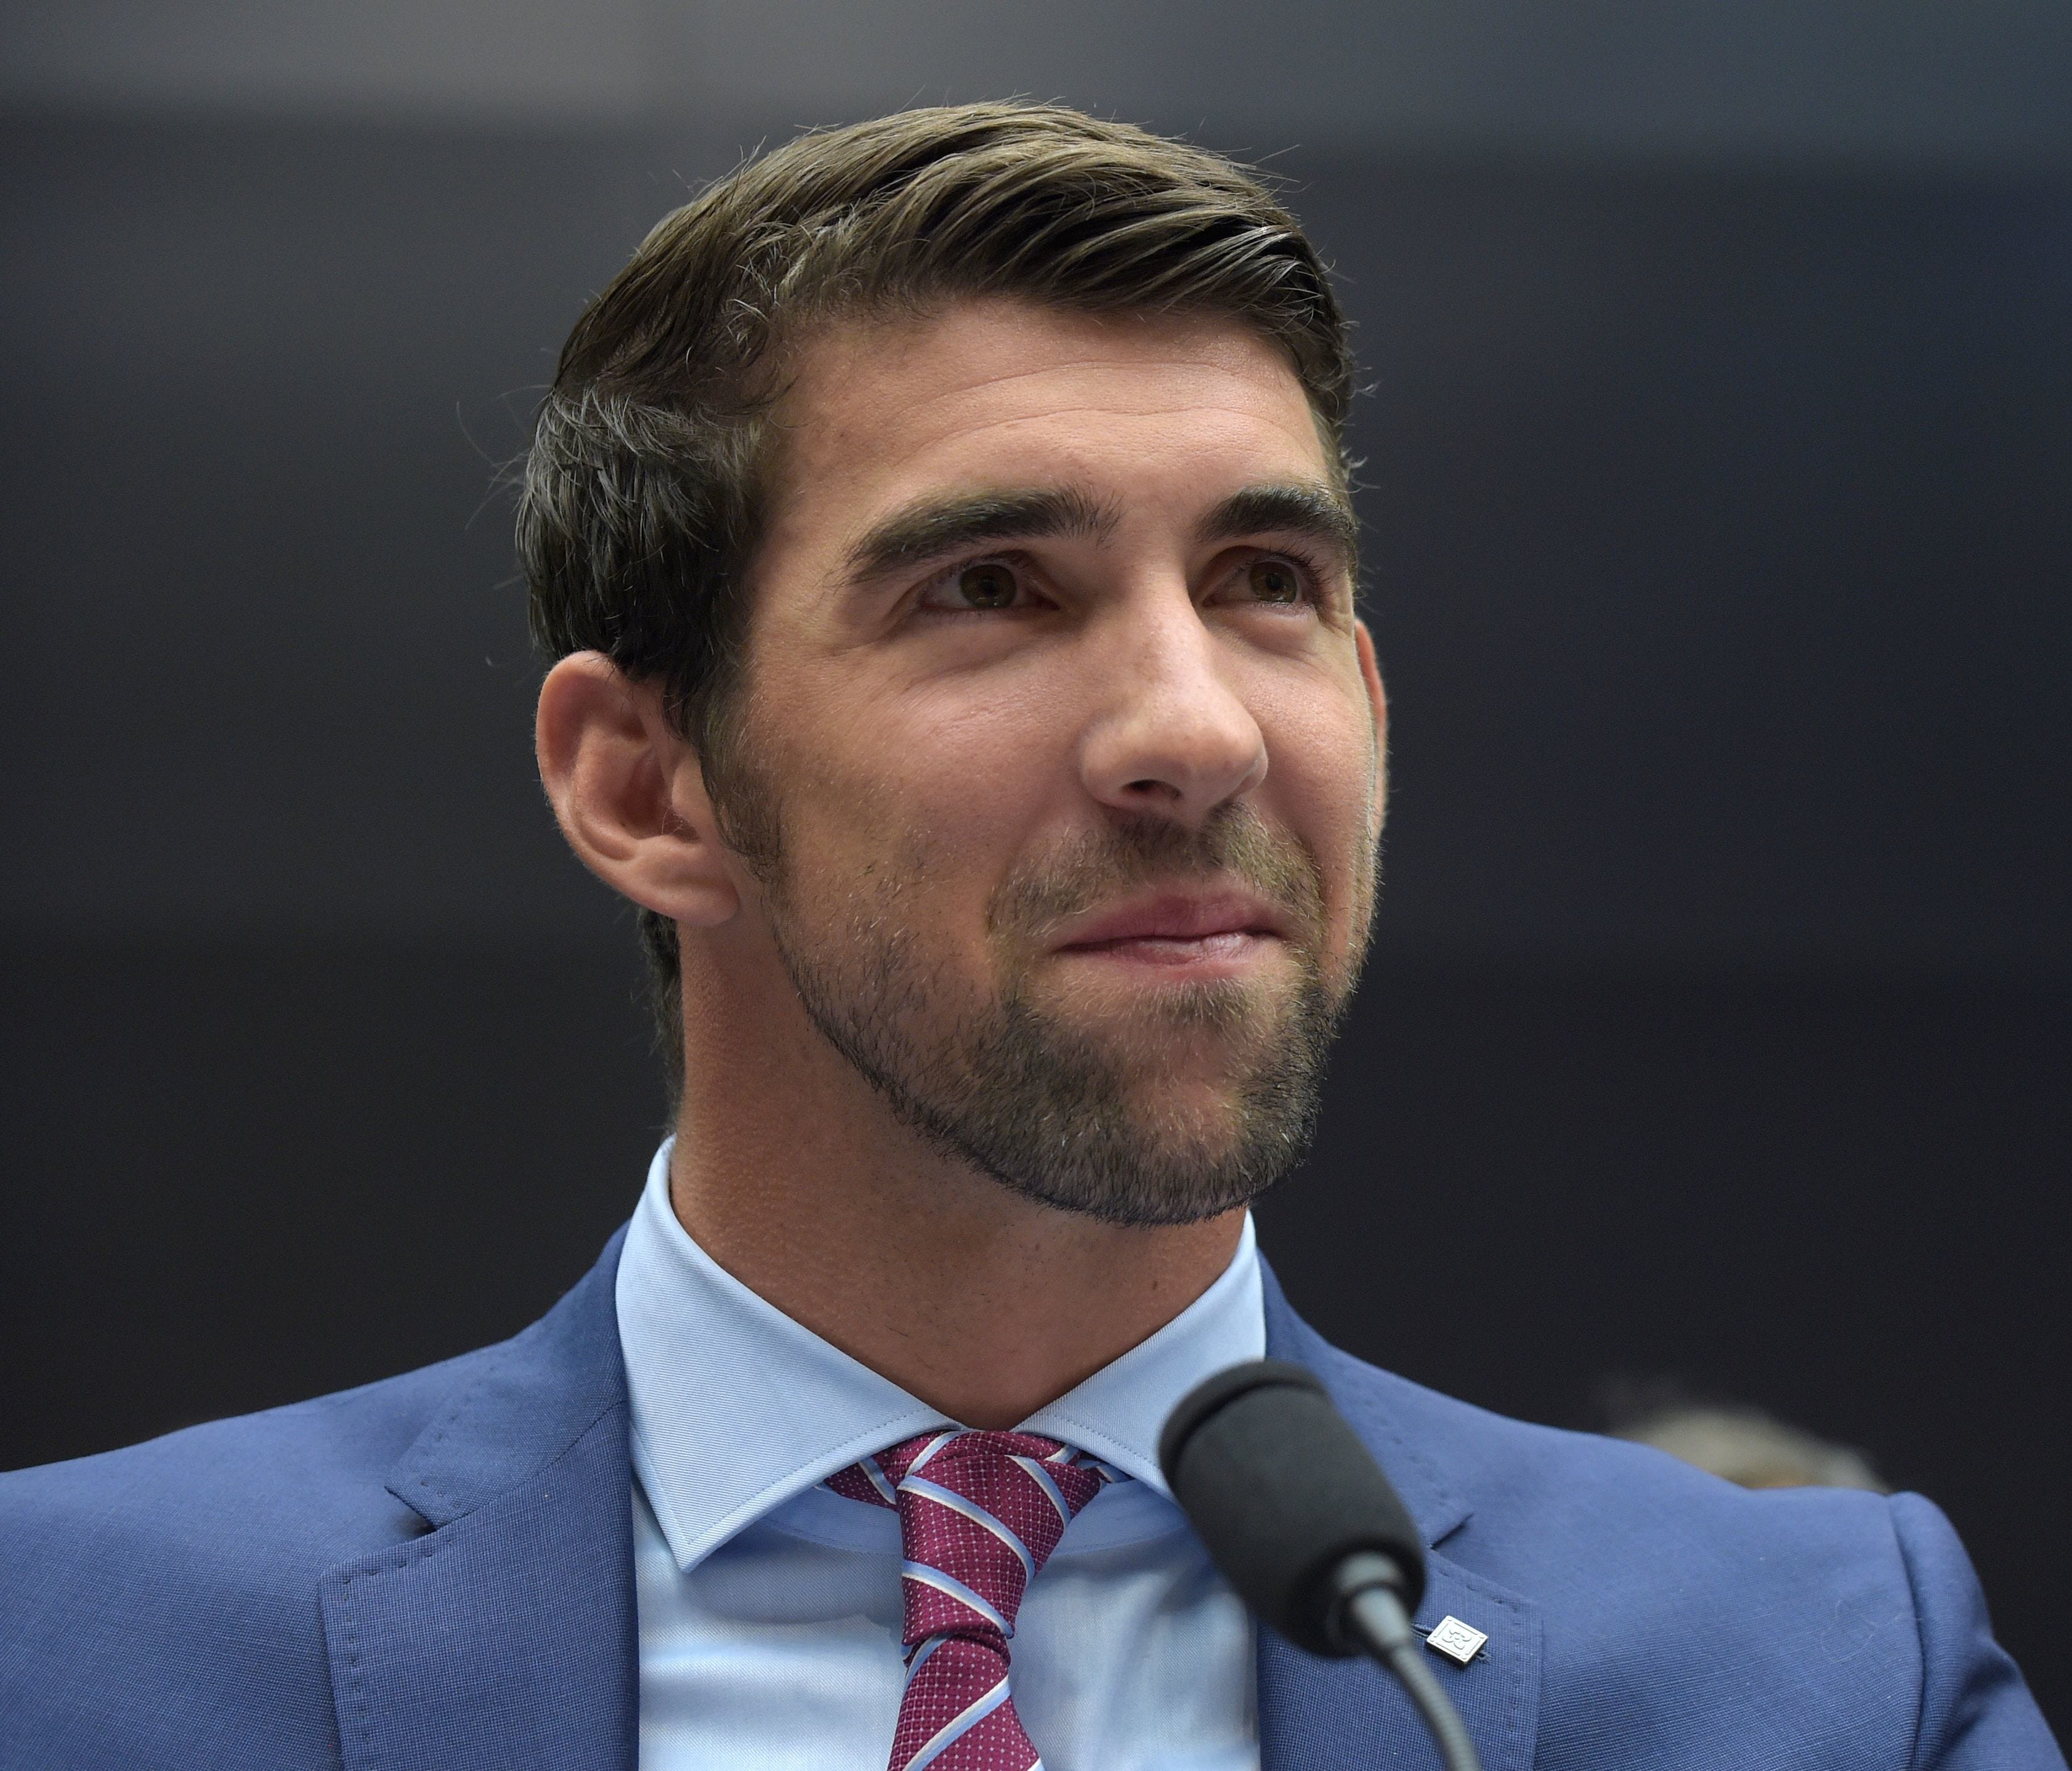 In February, Olympic swimmer Michael Phelps testified on Capitol Hill in Washington before the House Commerce Energy and Commerce subcommittee hearing on the international anti-doping system.